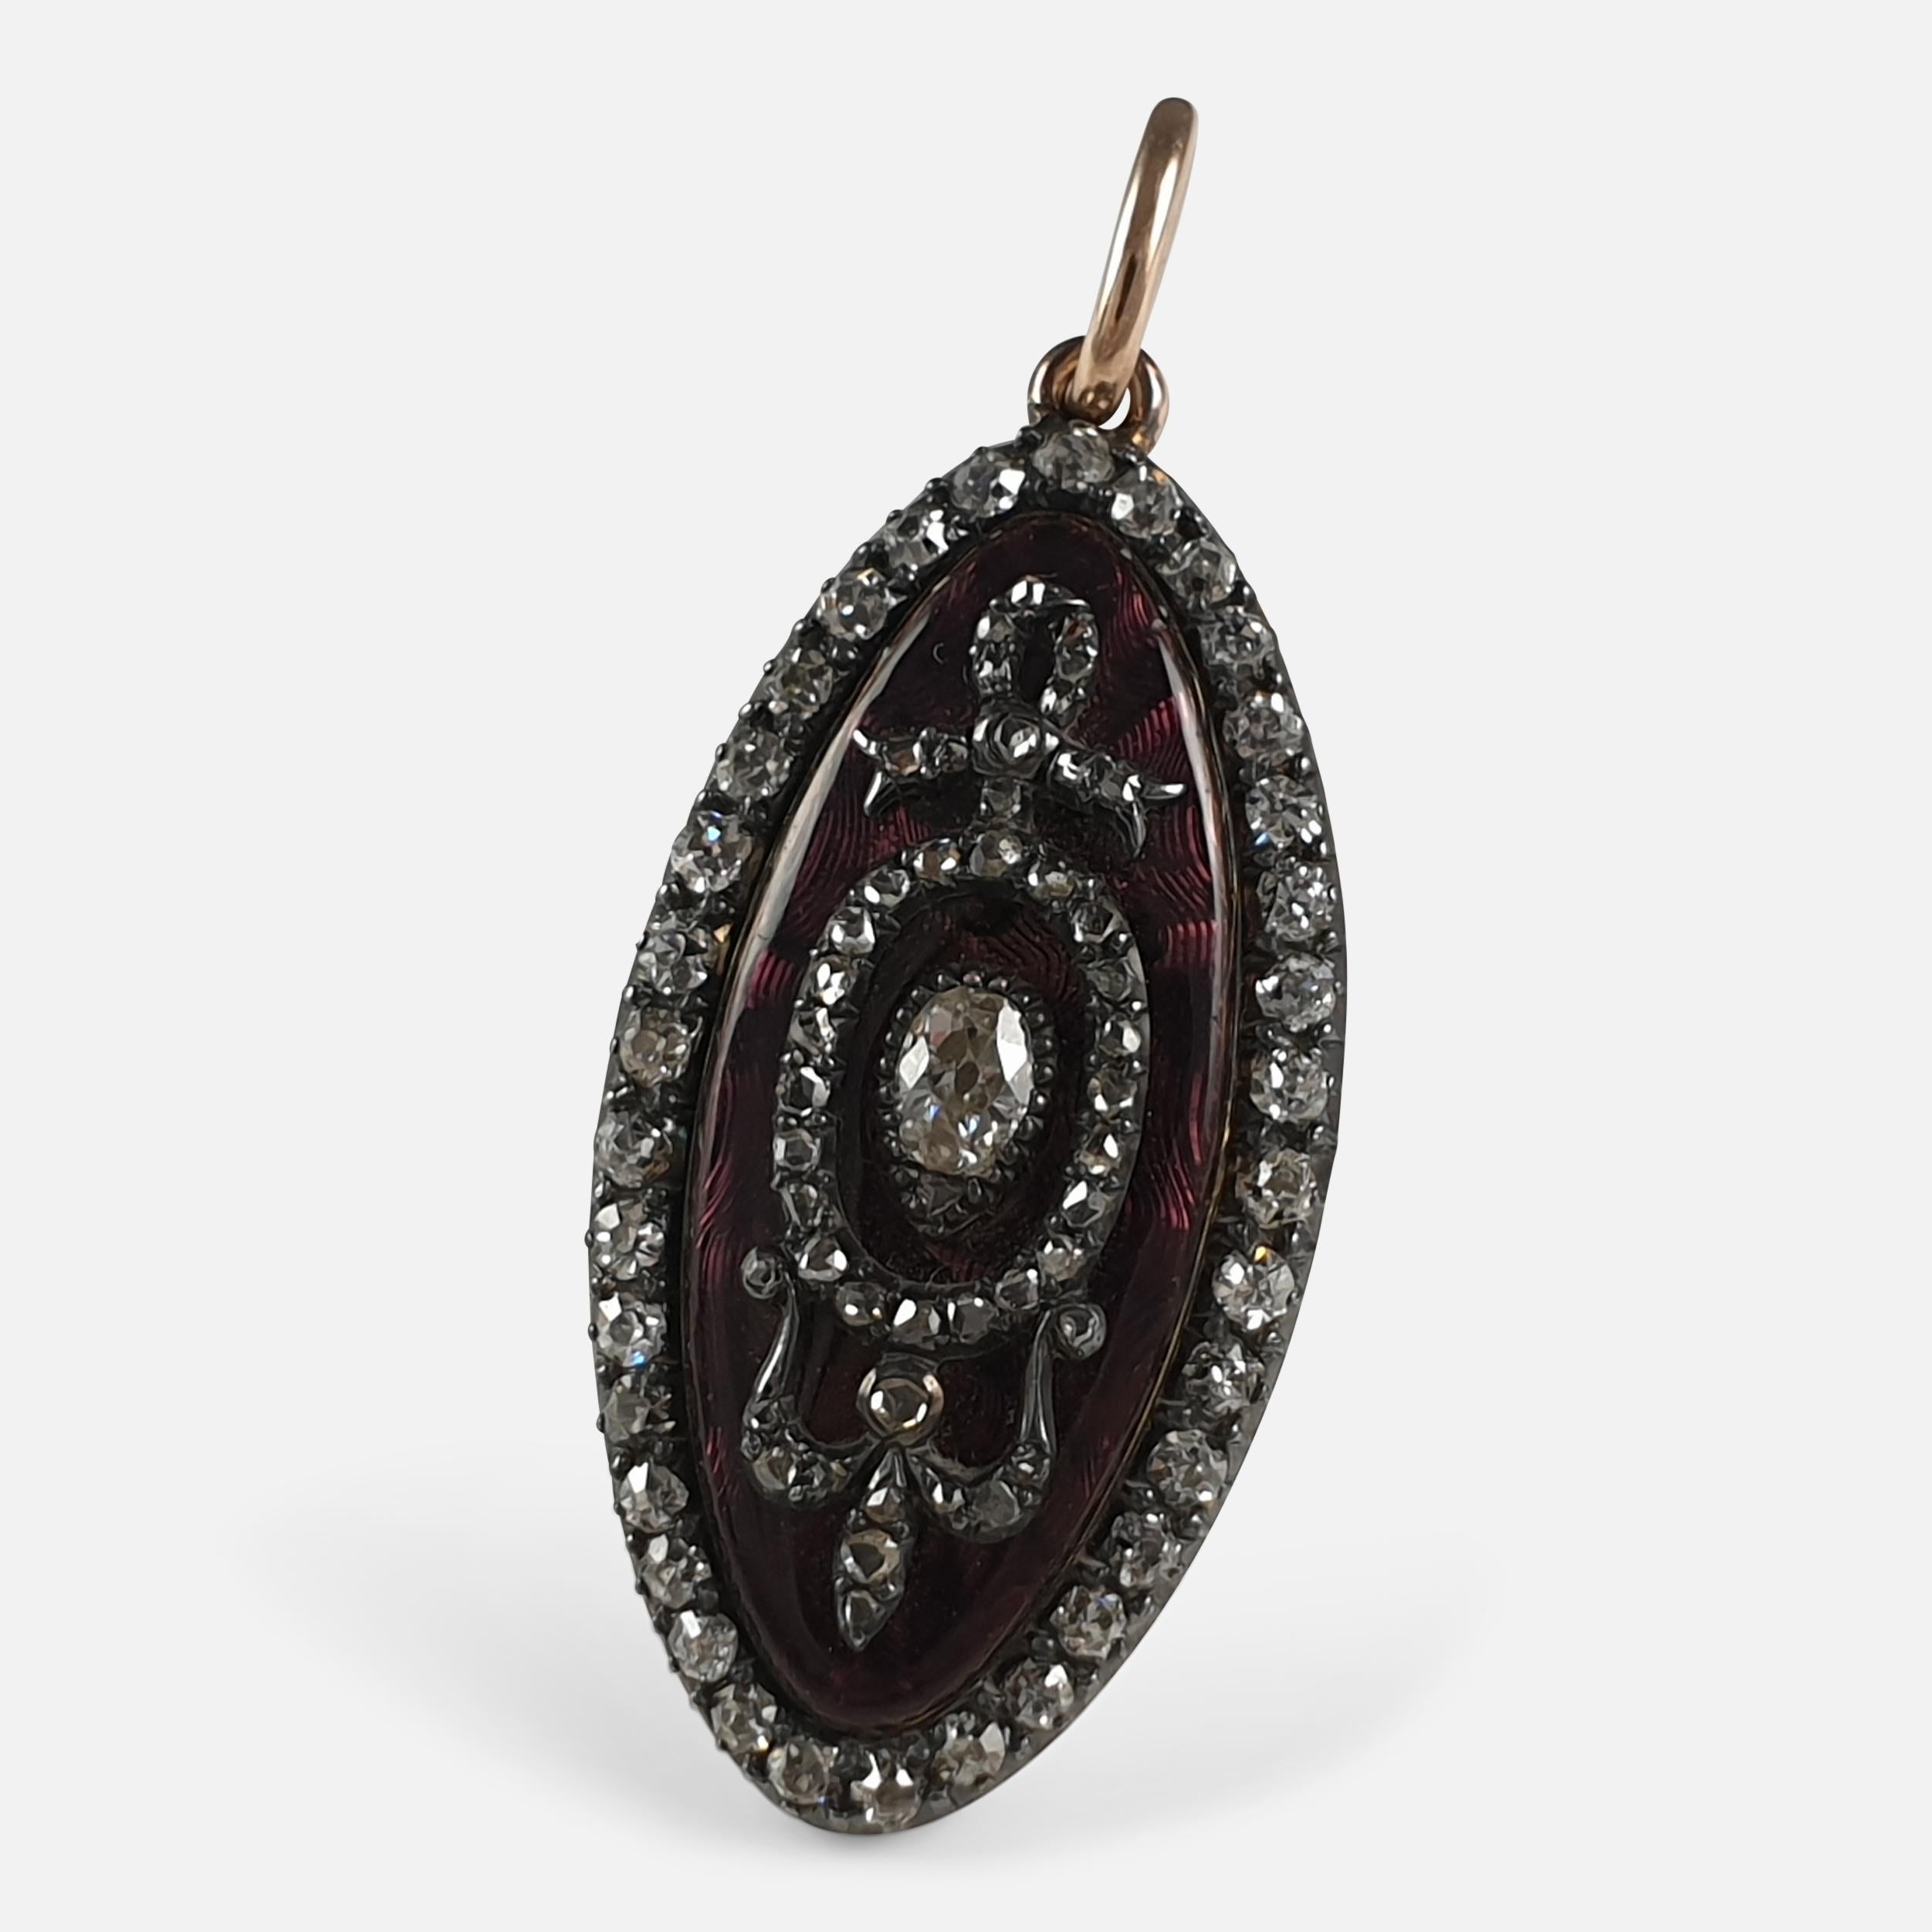 A George III diamond and enamel navette-shaped sentimental pendant, circa 1790. The pendant has been executed in the French manner, having an old cut diamond border, leading to a purple guilloche enameled ground, with a pear shaped old-cut diamond